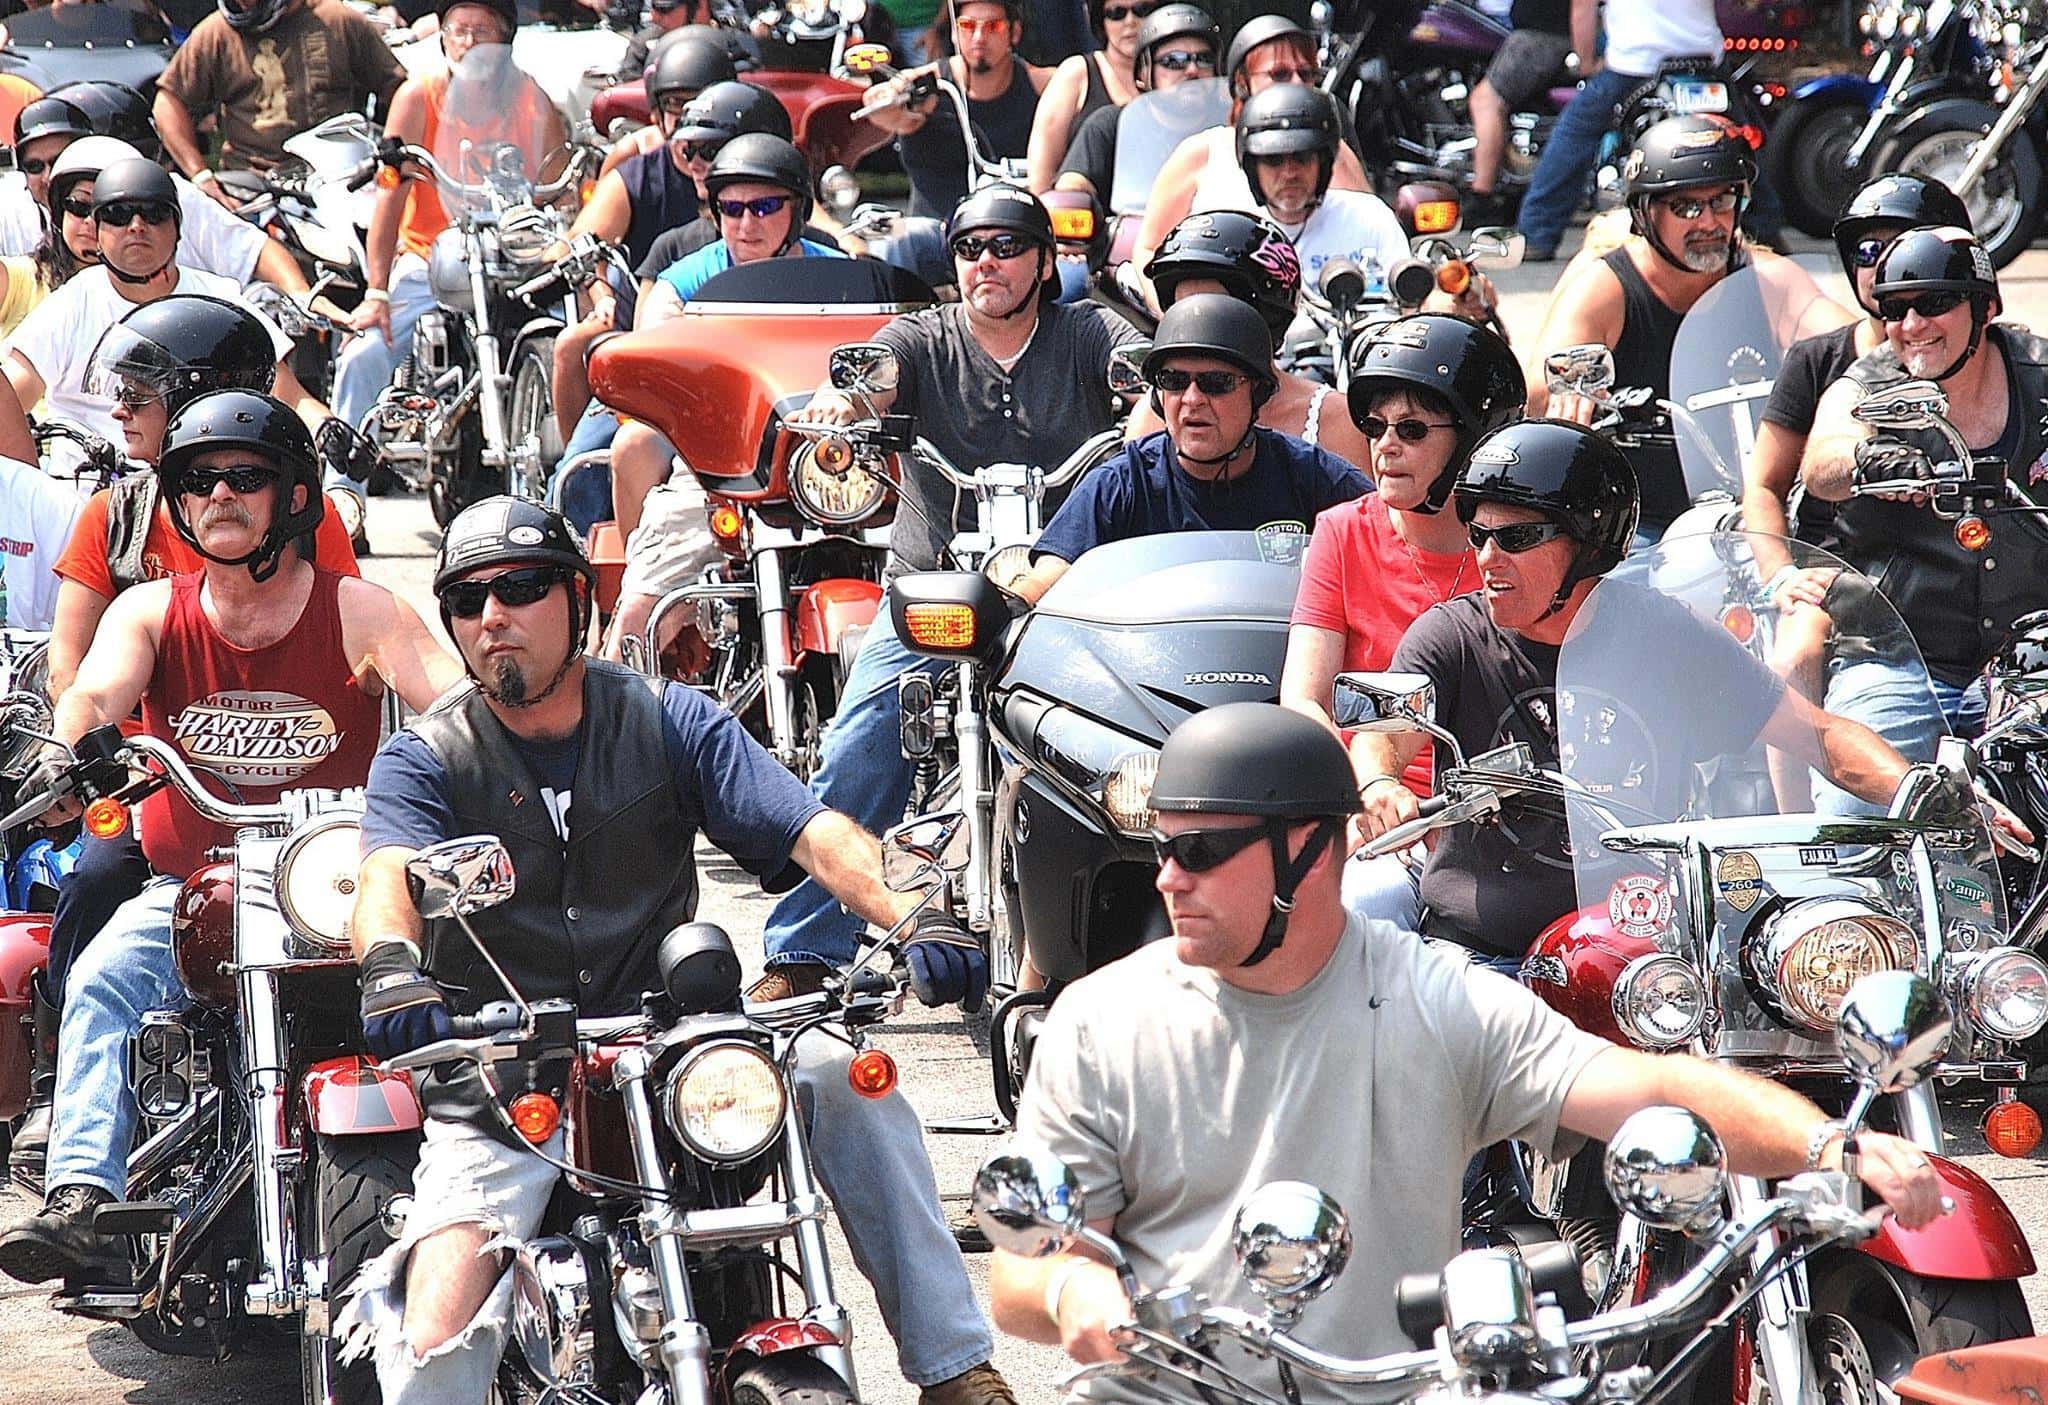 Hudson charity motorcycle ride, BBQ slated for Sept. 11